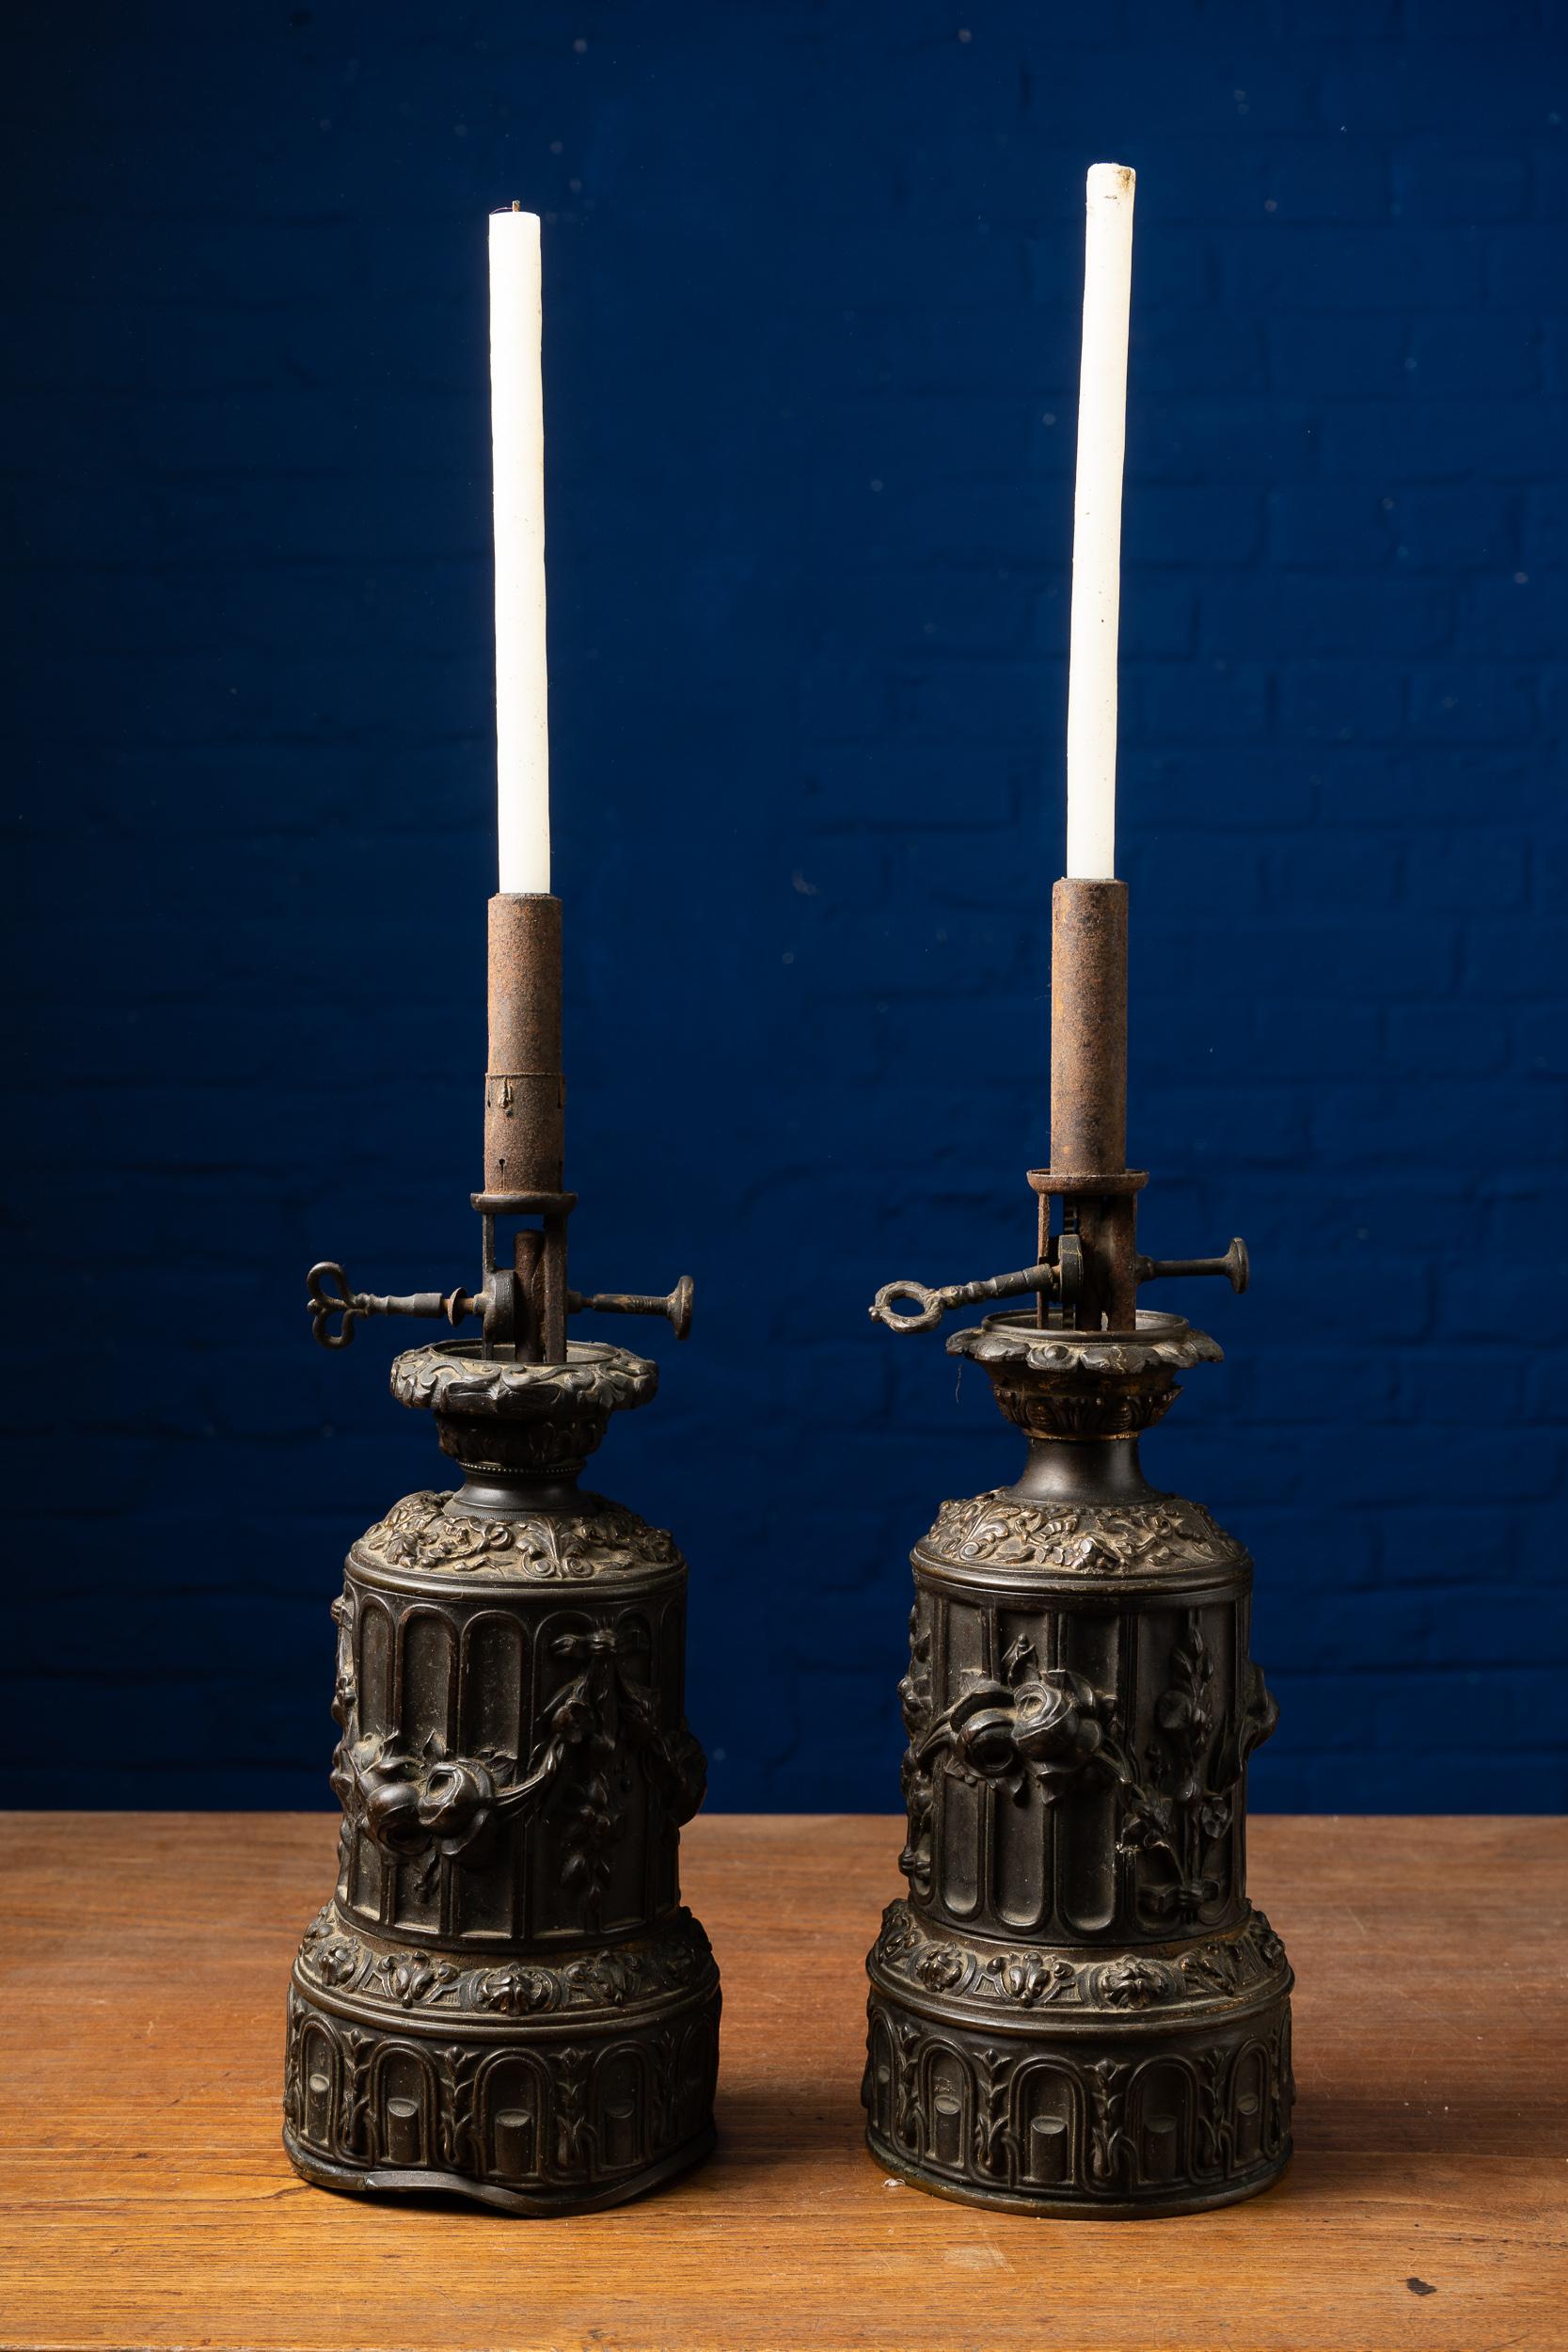 Unique ornate pair of copper alloy candleholders with moulded ribbons, foliage and floral features. The items are tagged on the bottom: Becatiltre Breveté.